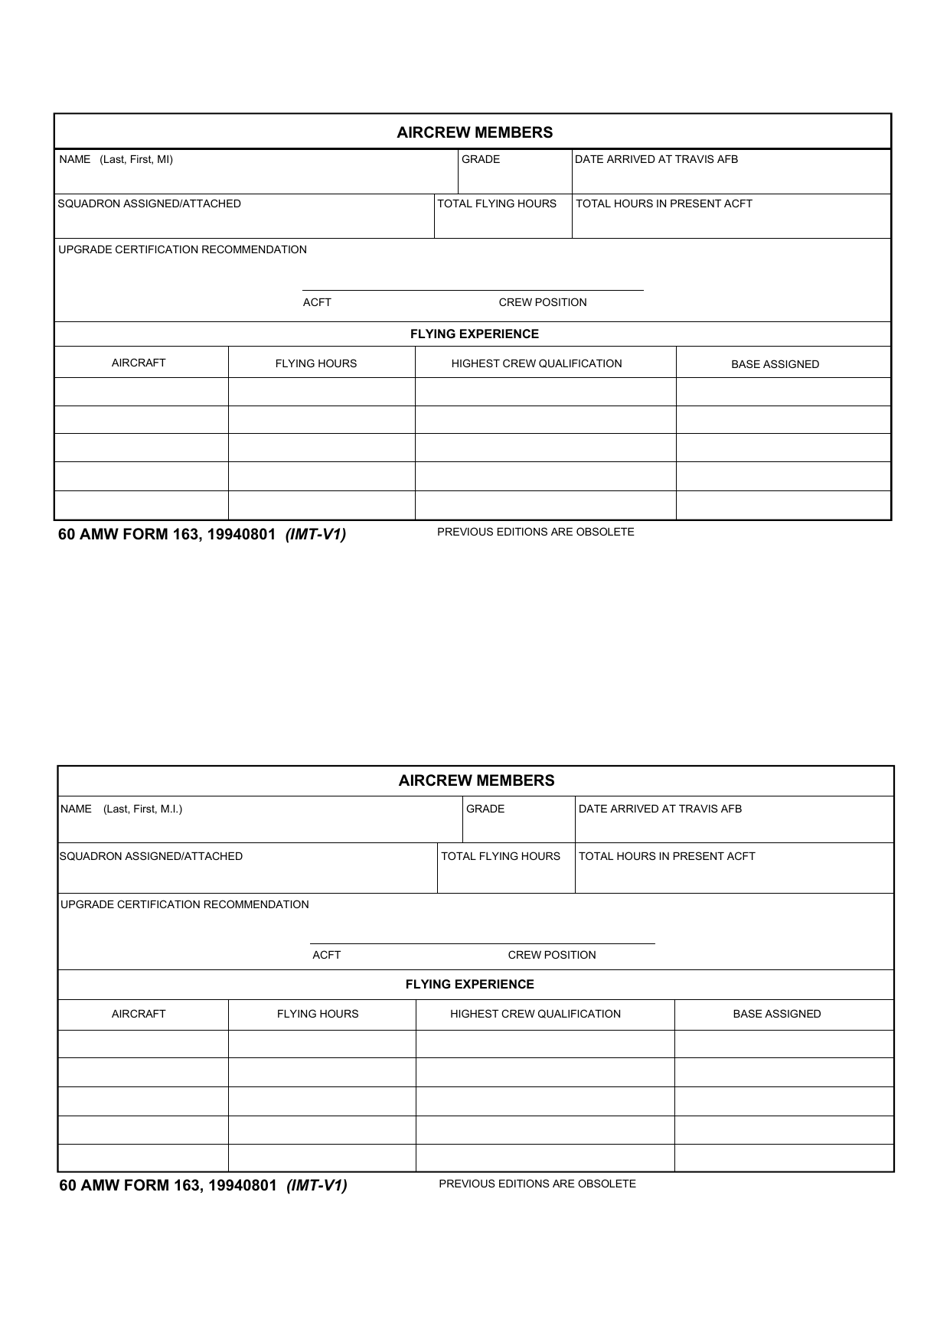 60 AMW Form 163 Aircrew Memebers Resume, Page 1